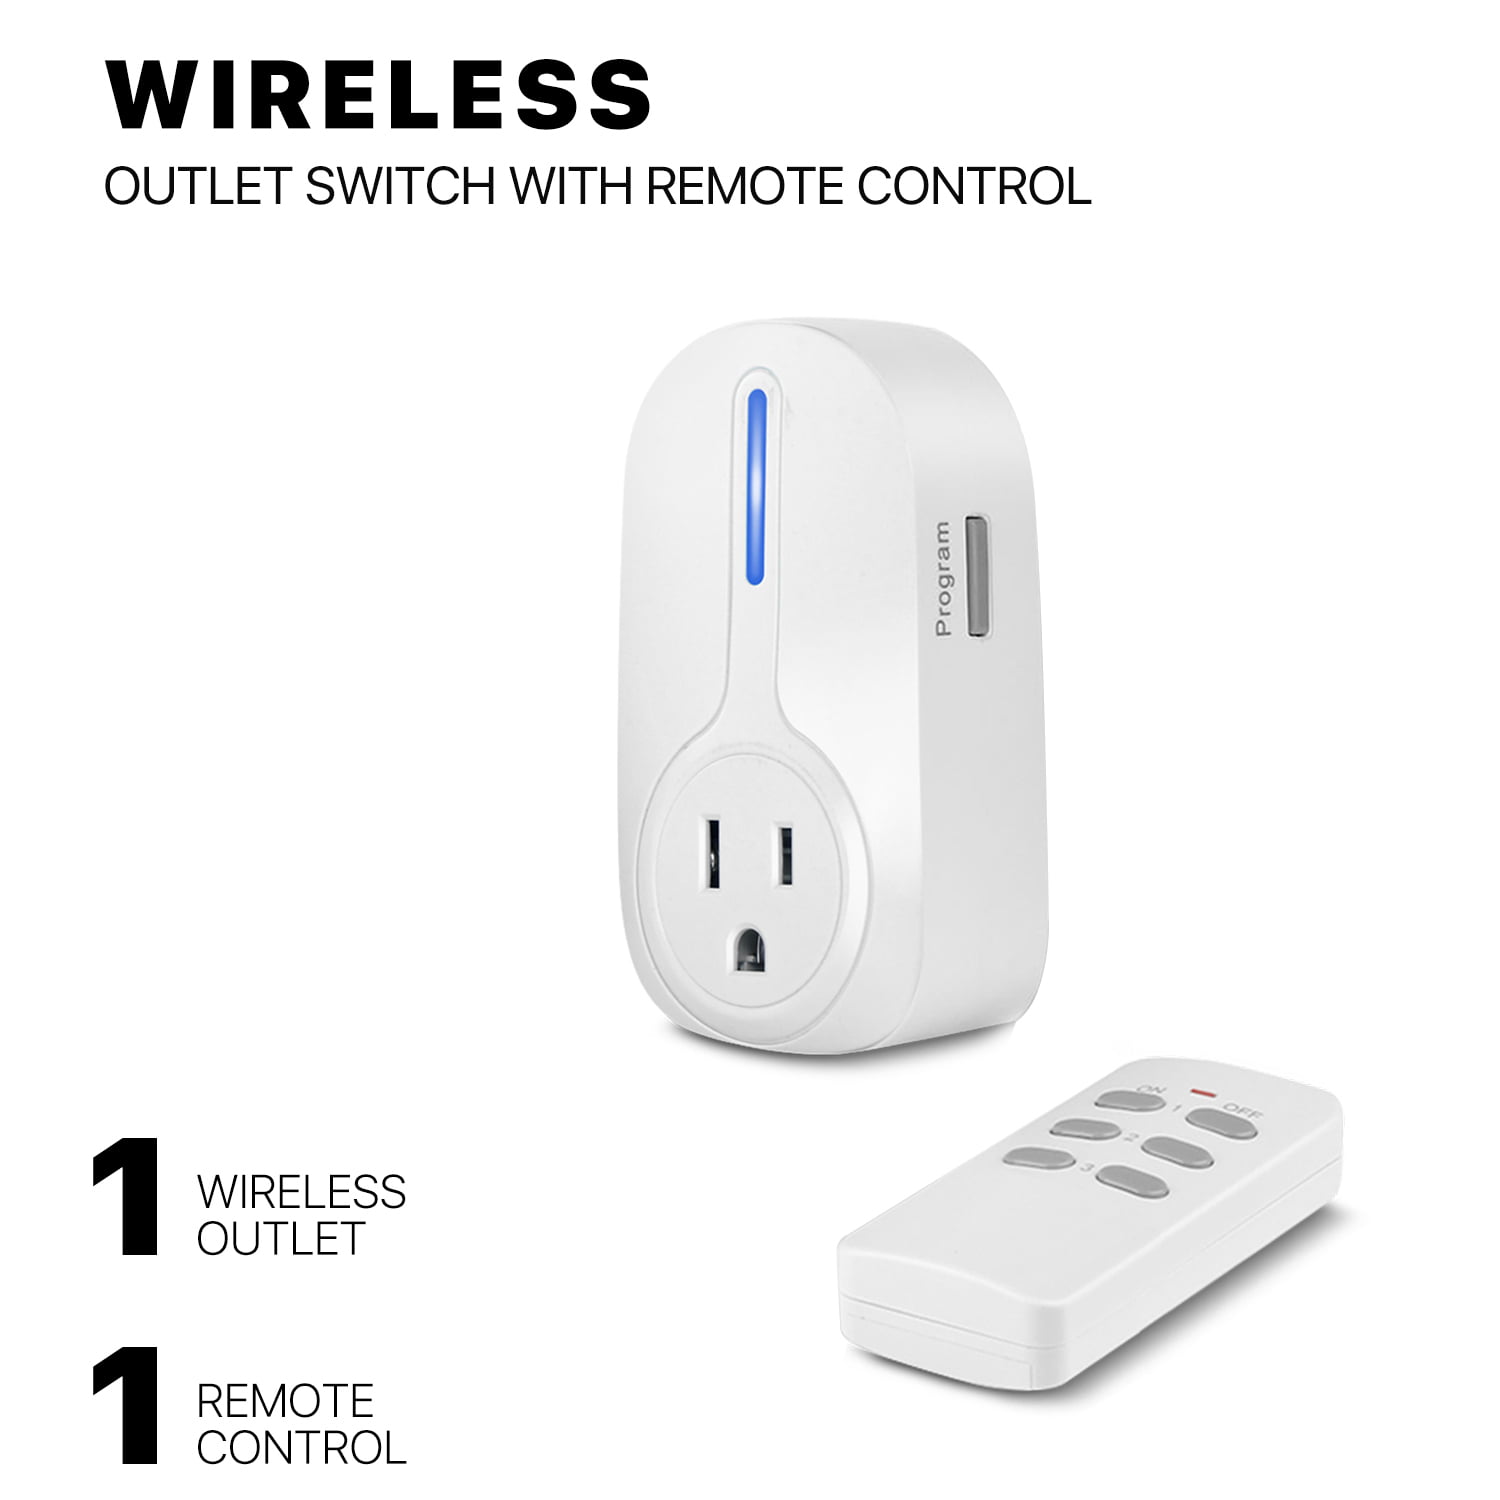 Sonsonai Wireless Remote Control Outlet Plug Kit, 5 Outlets + 2 Remotes,  Control Lights, Fans & Small Appliances from Long Range, White, 1800W/15A